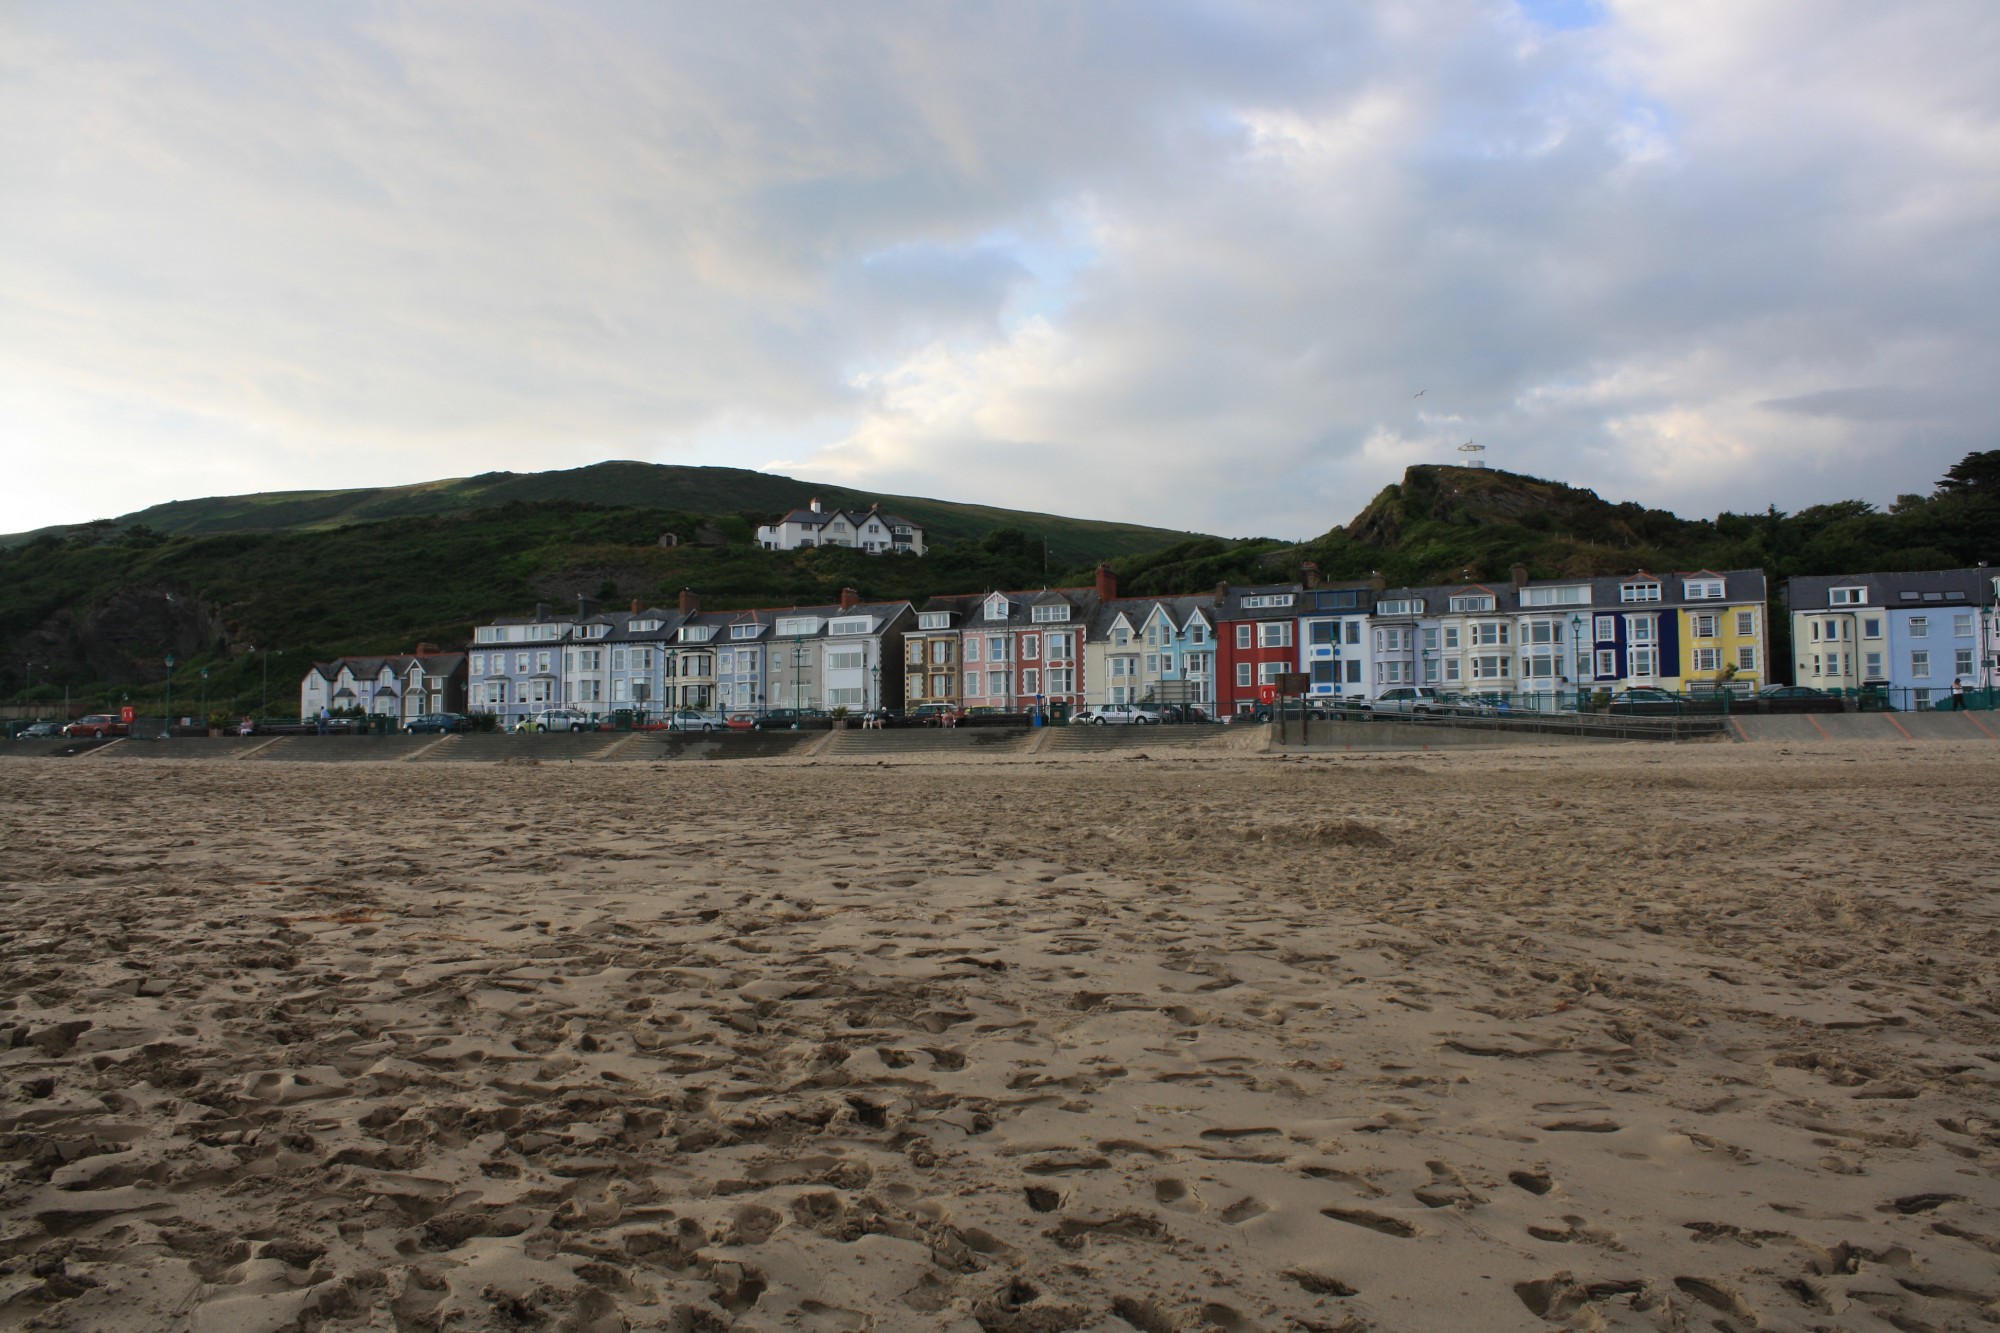 The Aberdovey beach and seafront